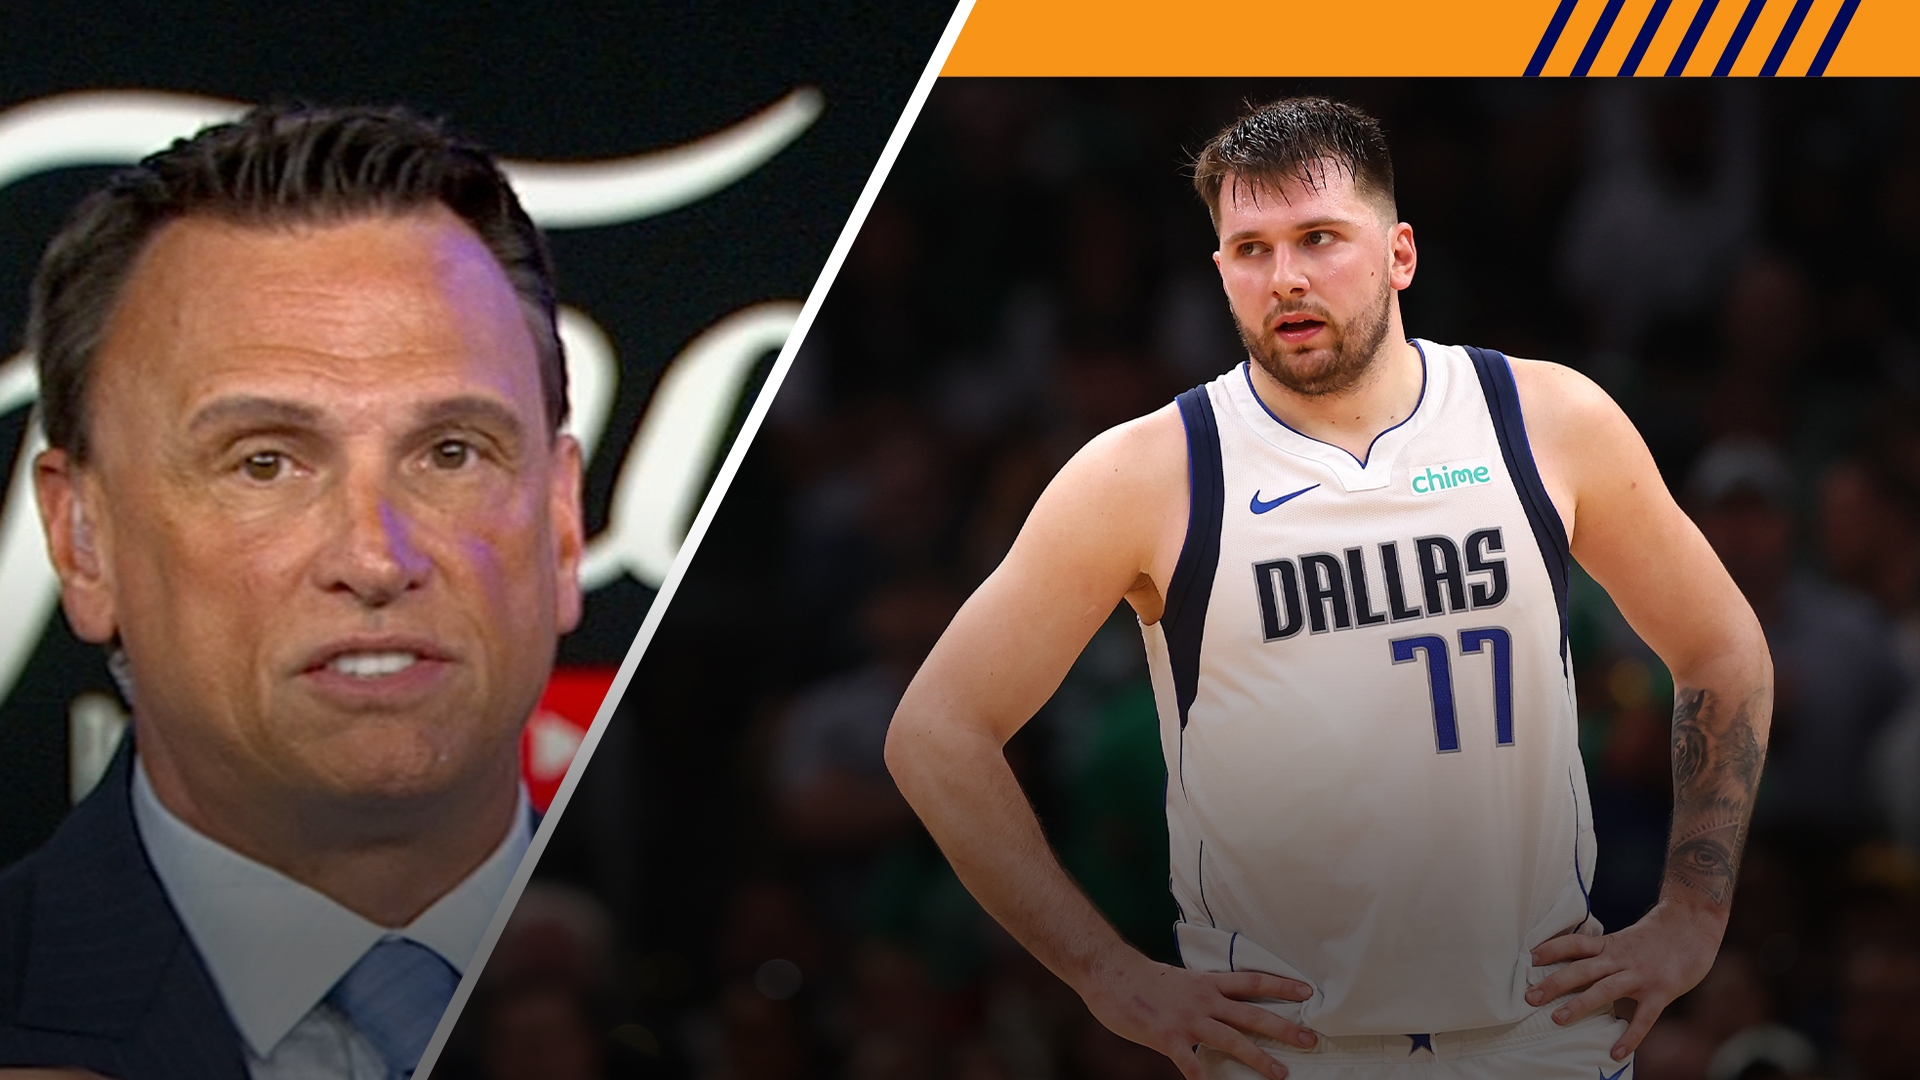 What went wrong for the Mavericks in Game 2?